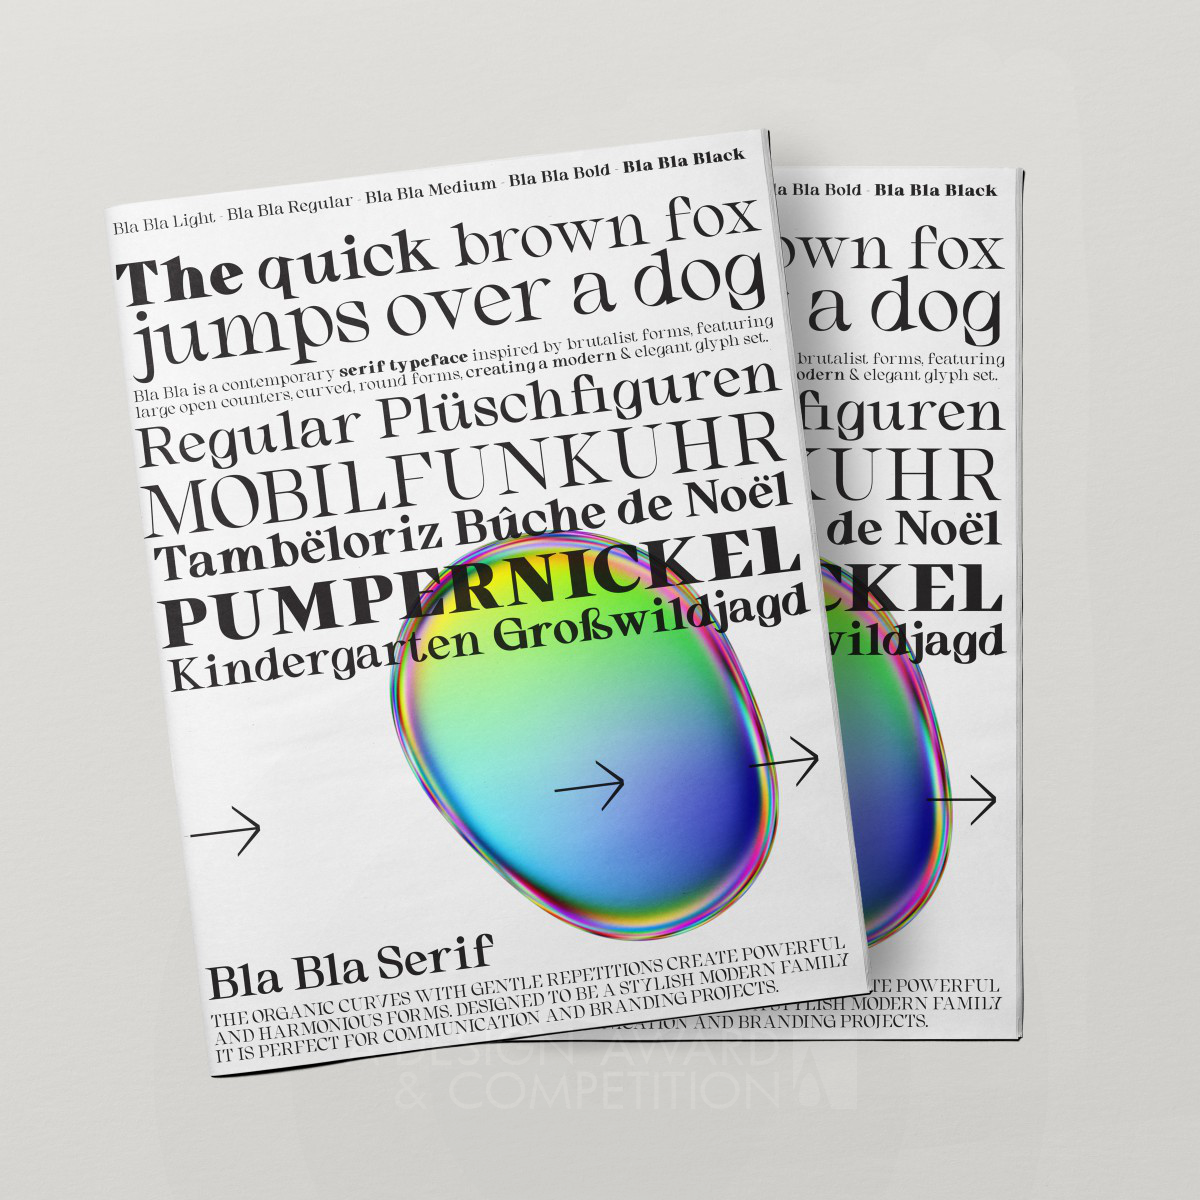 Bla Bla Serif: A Modern Typeface Inspired by Brutalist Forms